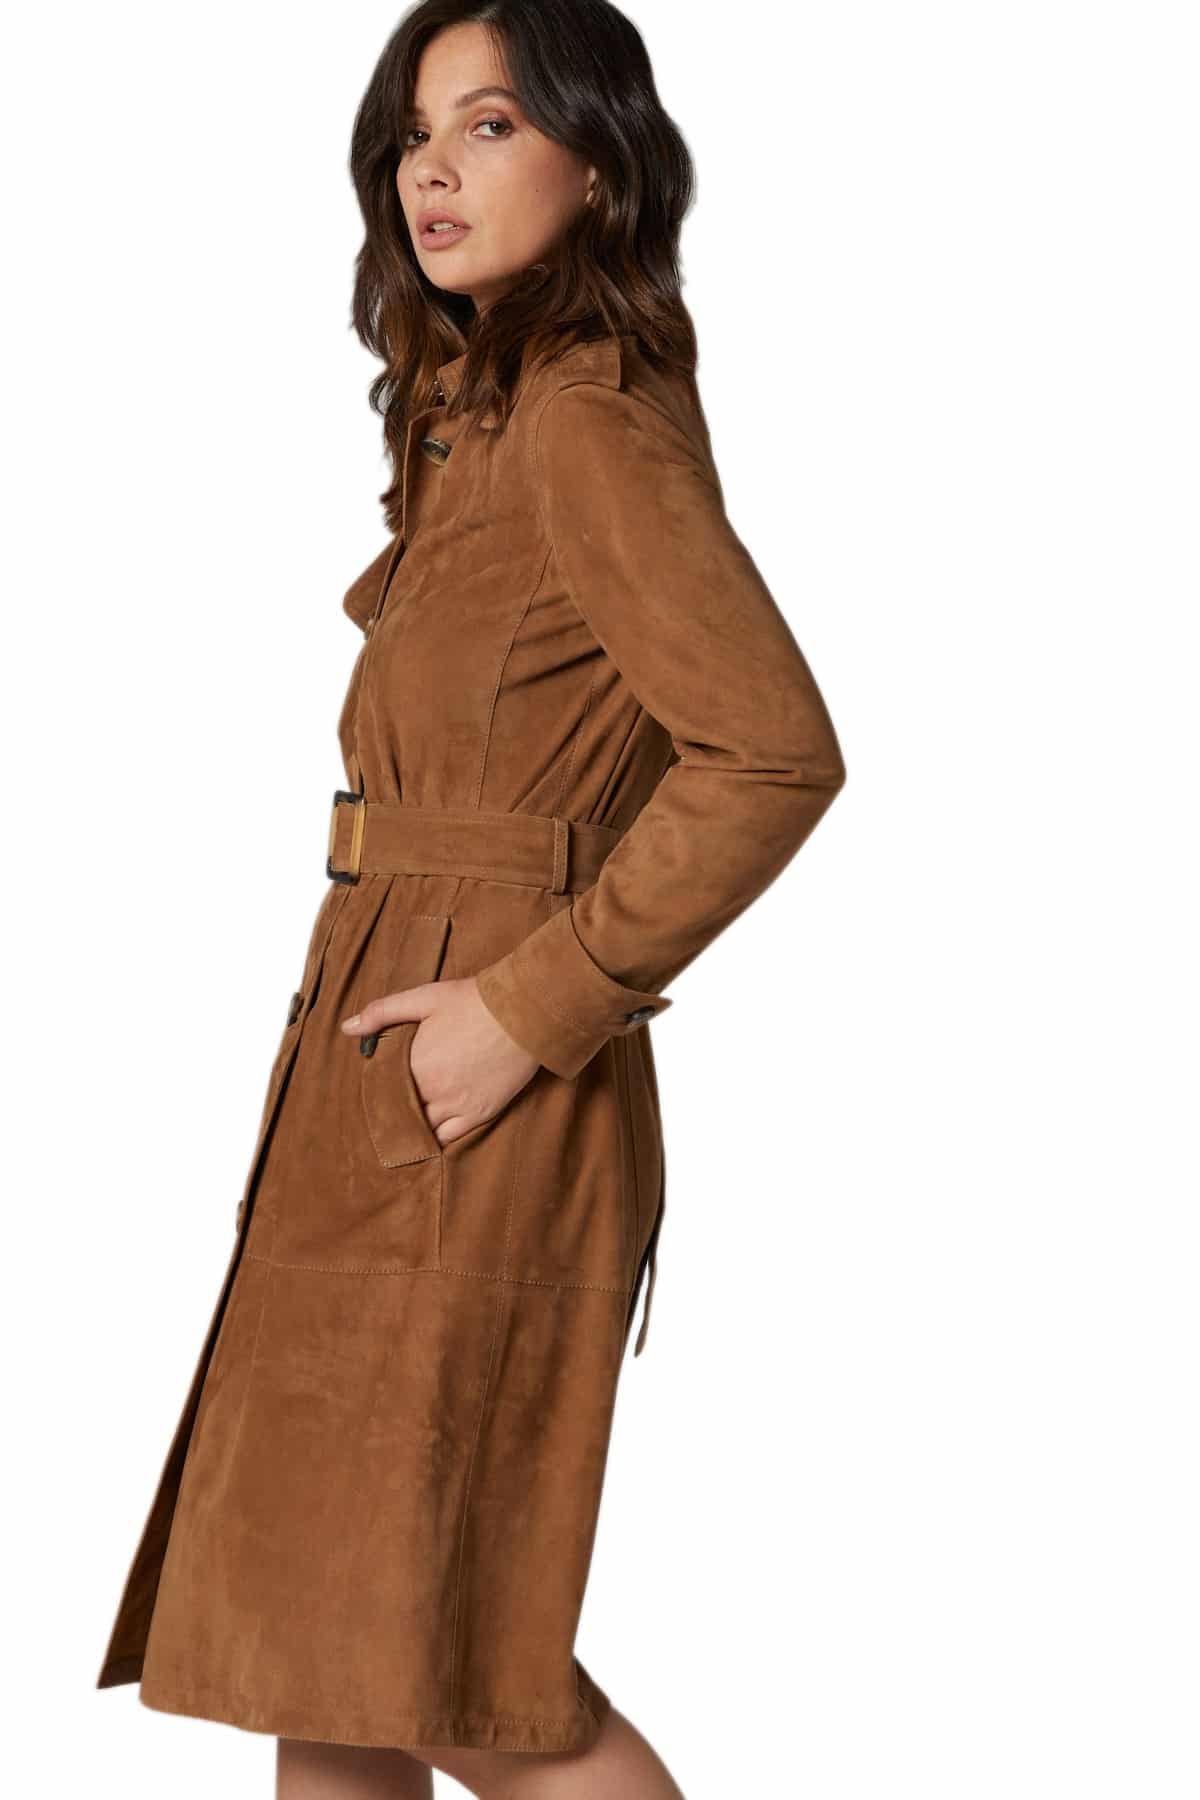 Camel Brown Real Suede Leather Trench Coats in Jacksonville